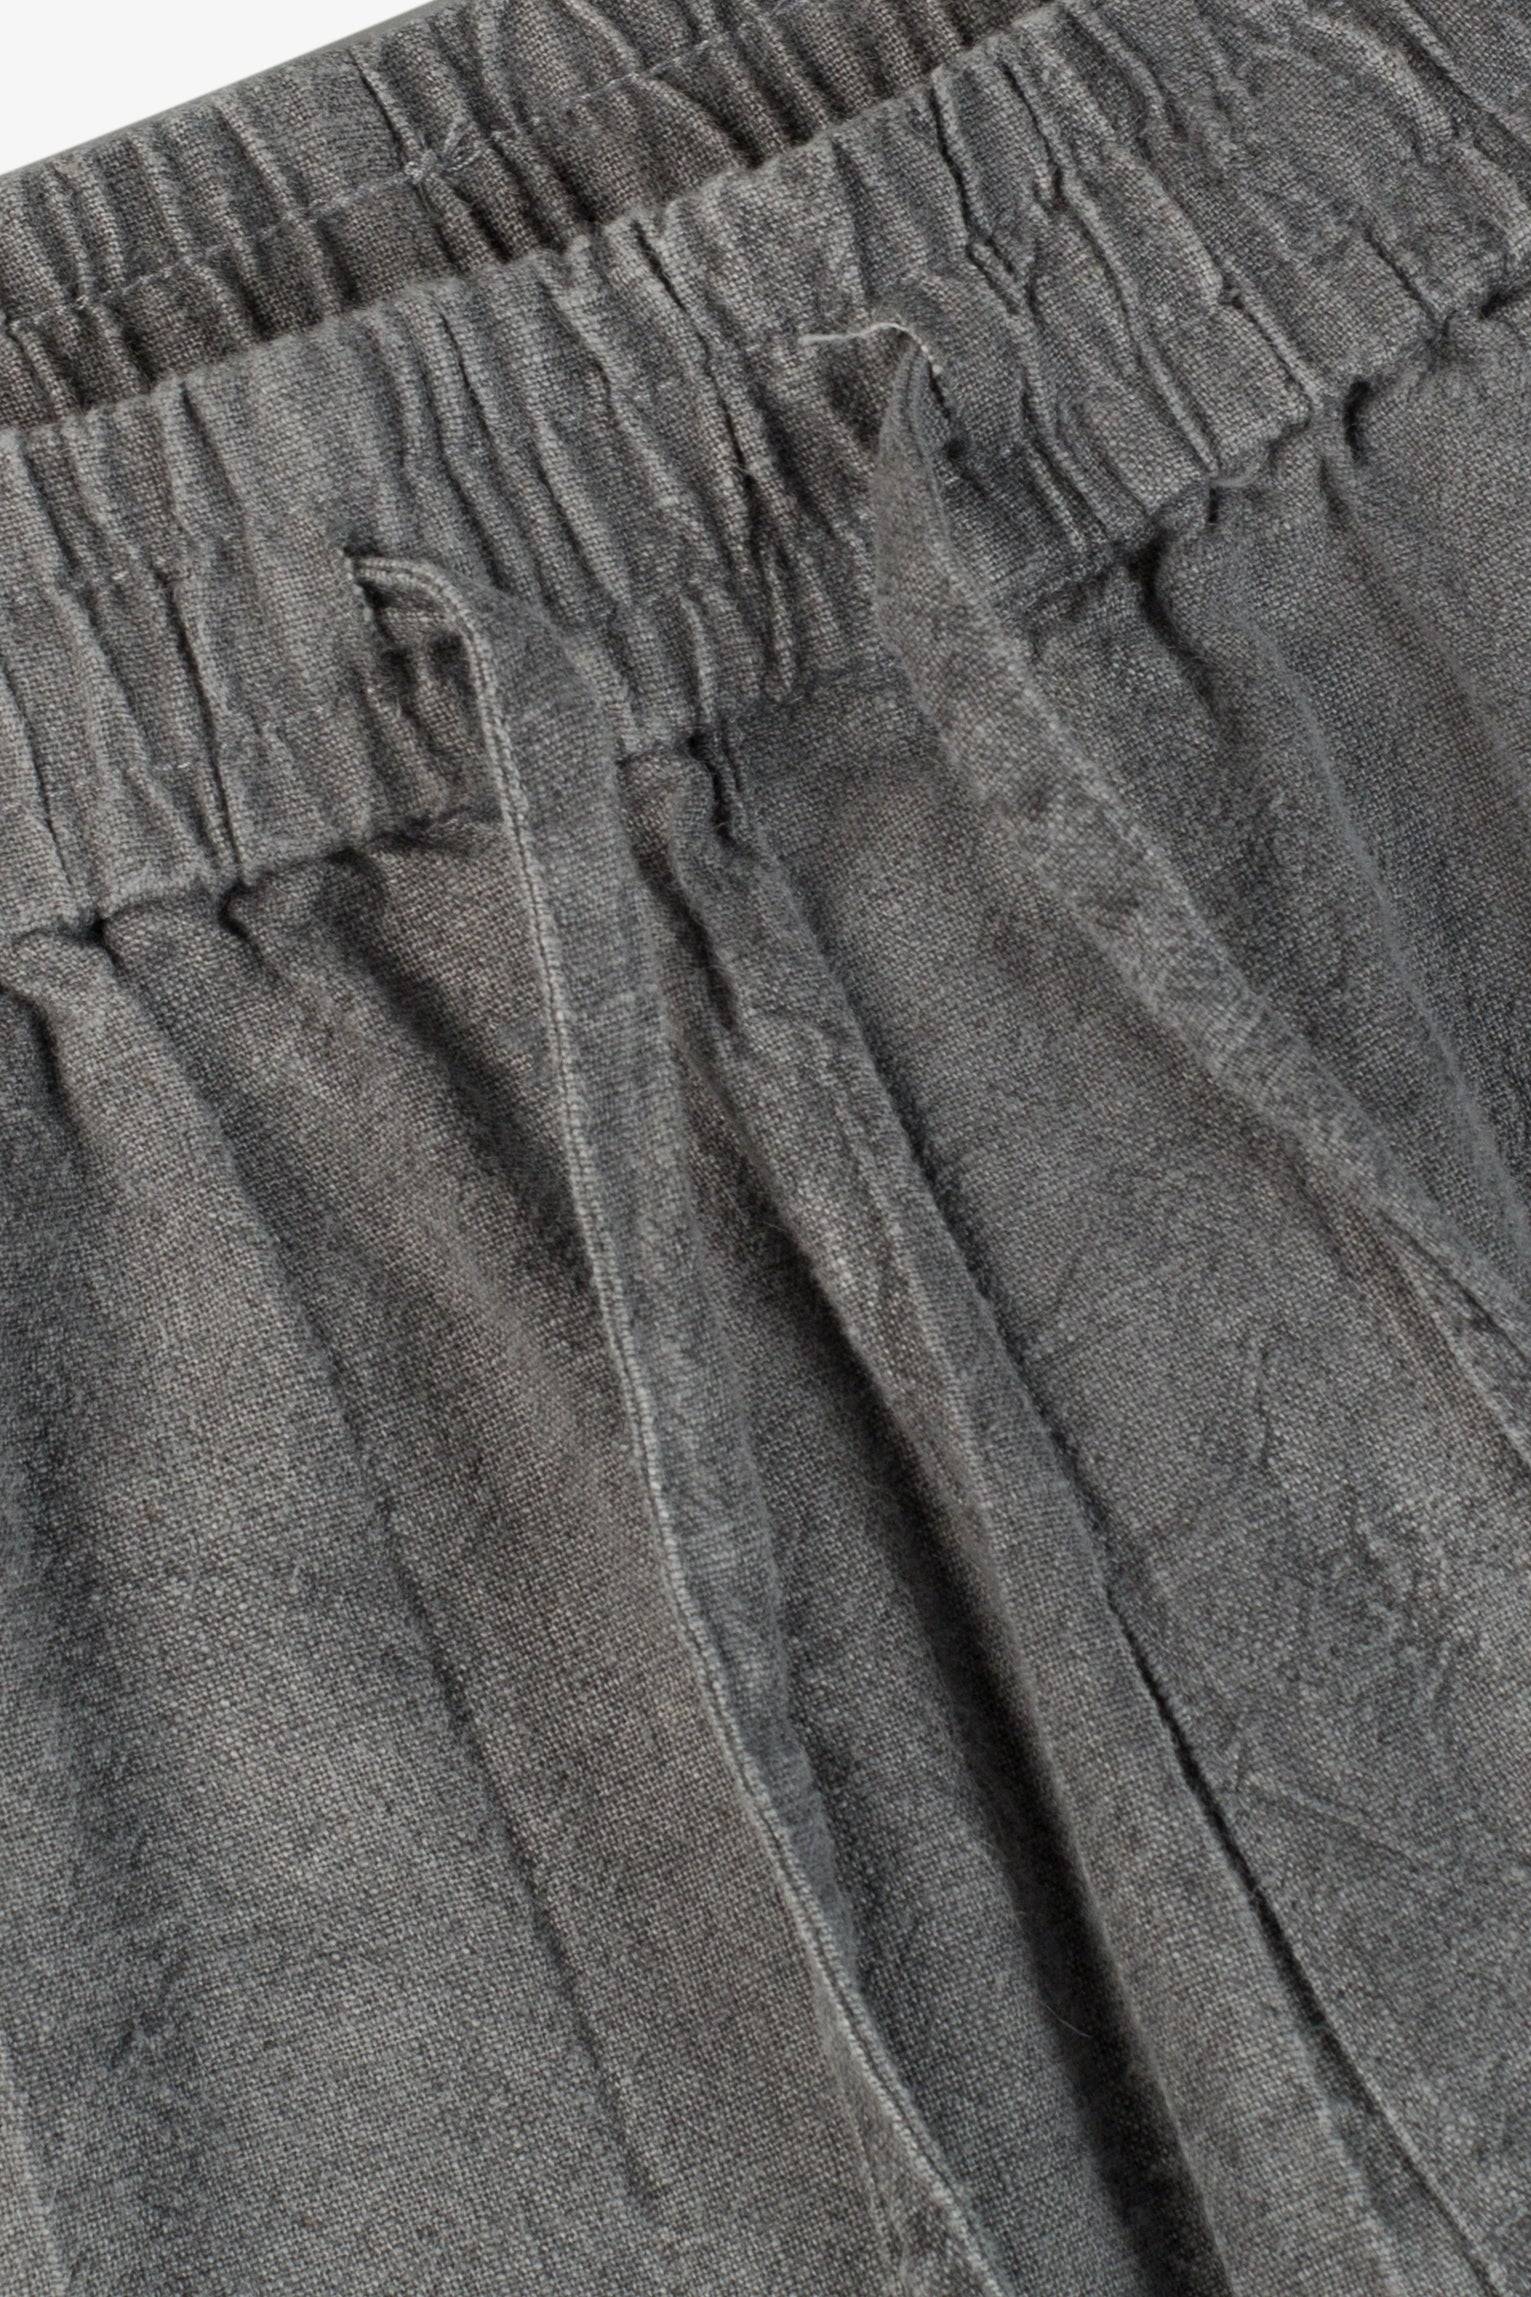 a close up of a pair of gray pants